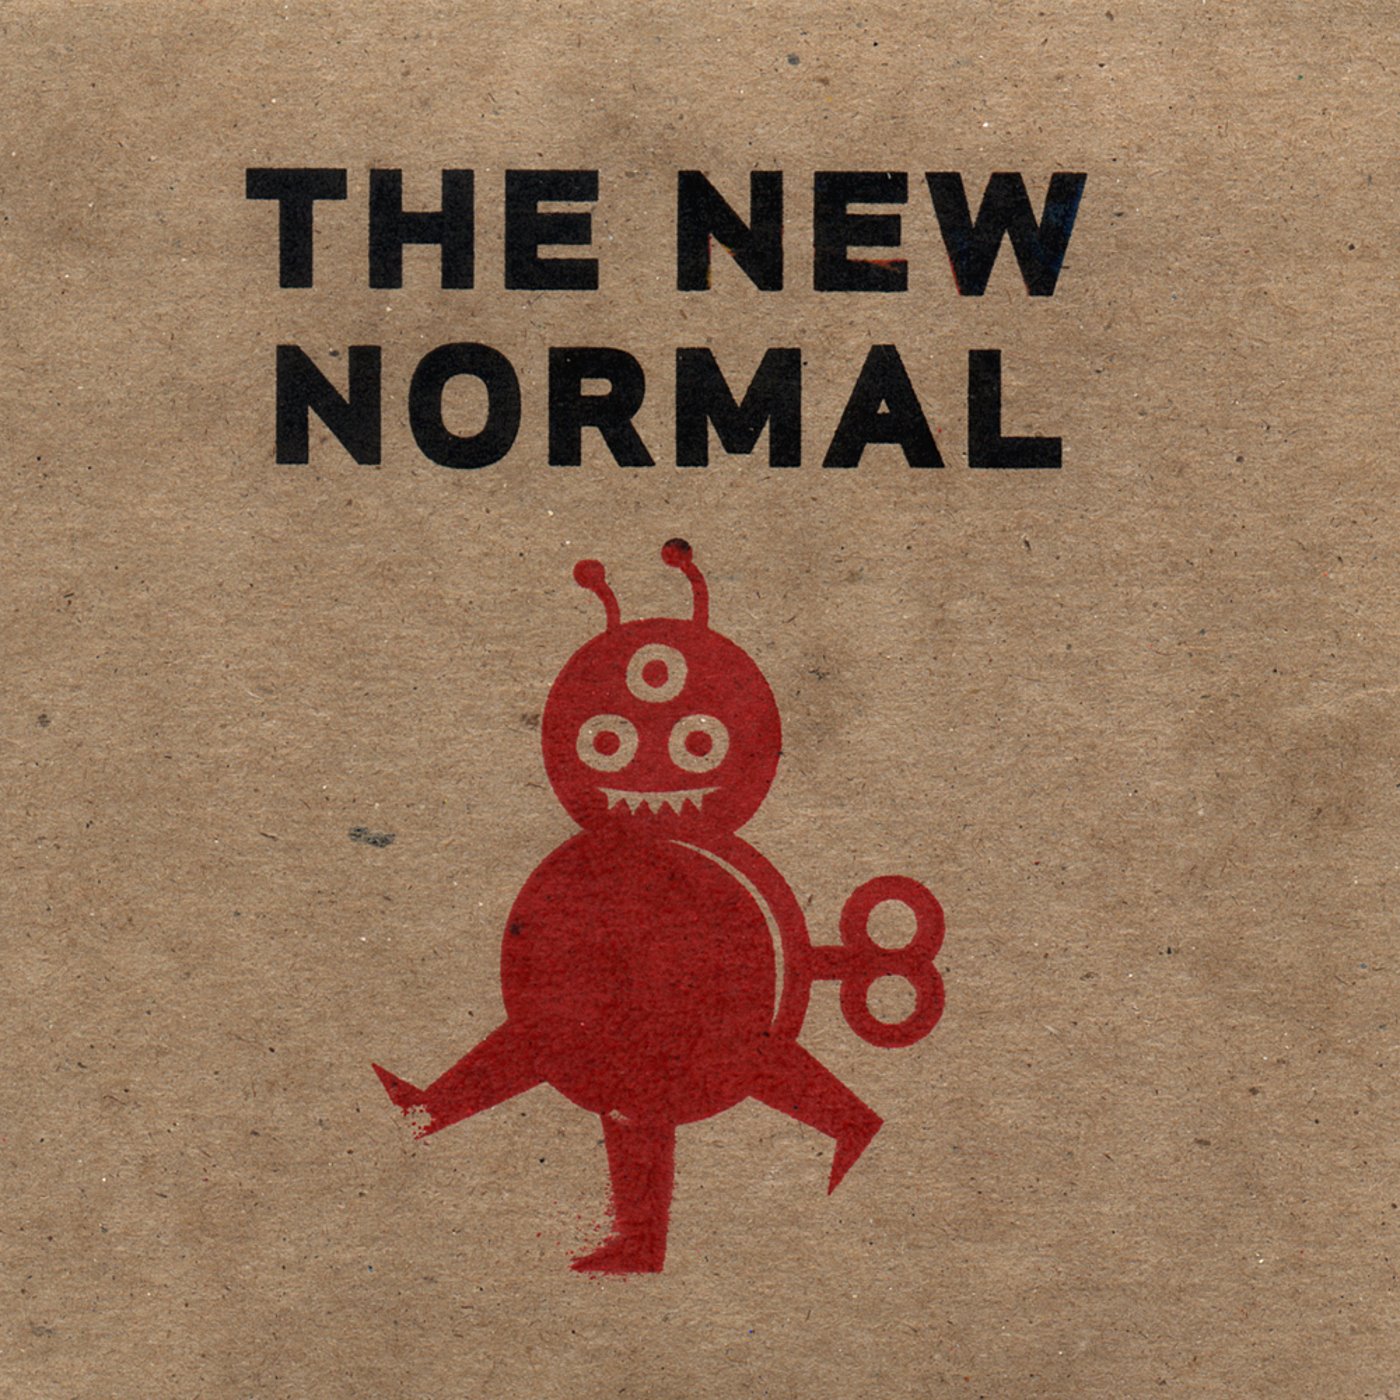 [the+new+normal.jpg]